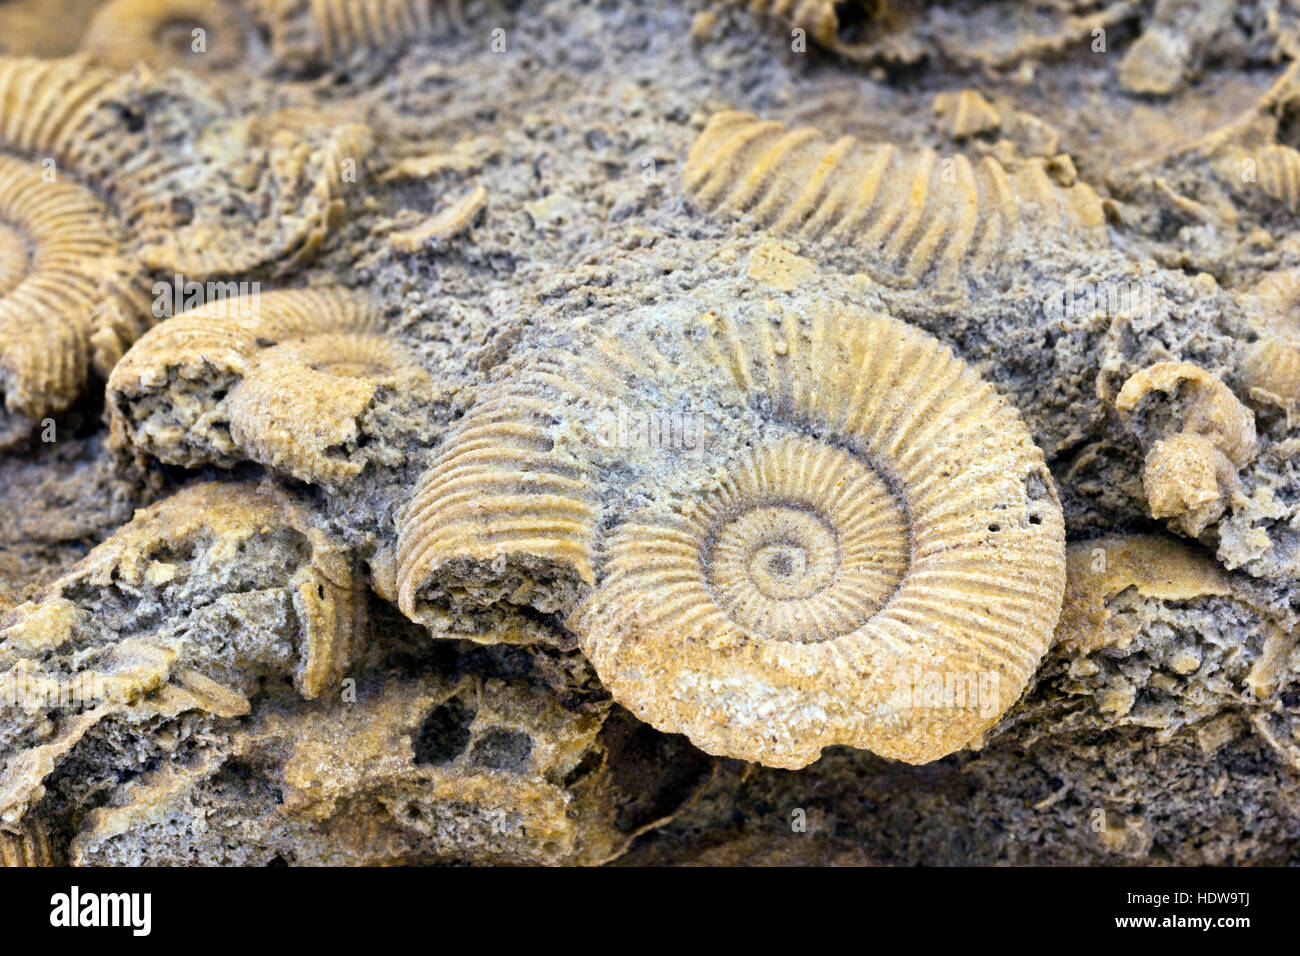 Ammonite shoal (Dactylioceras sp.), approx. 170 million years old